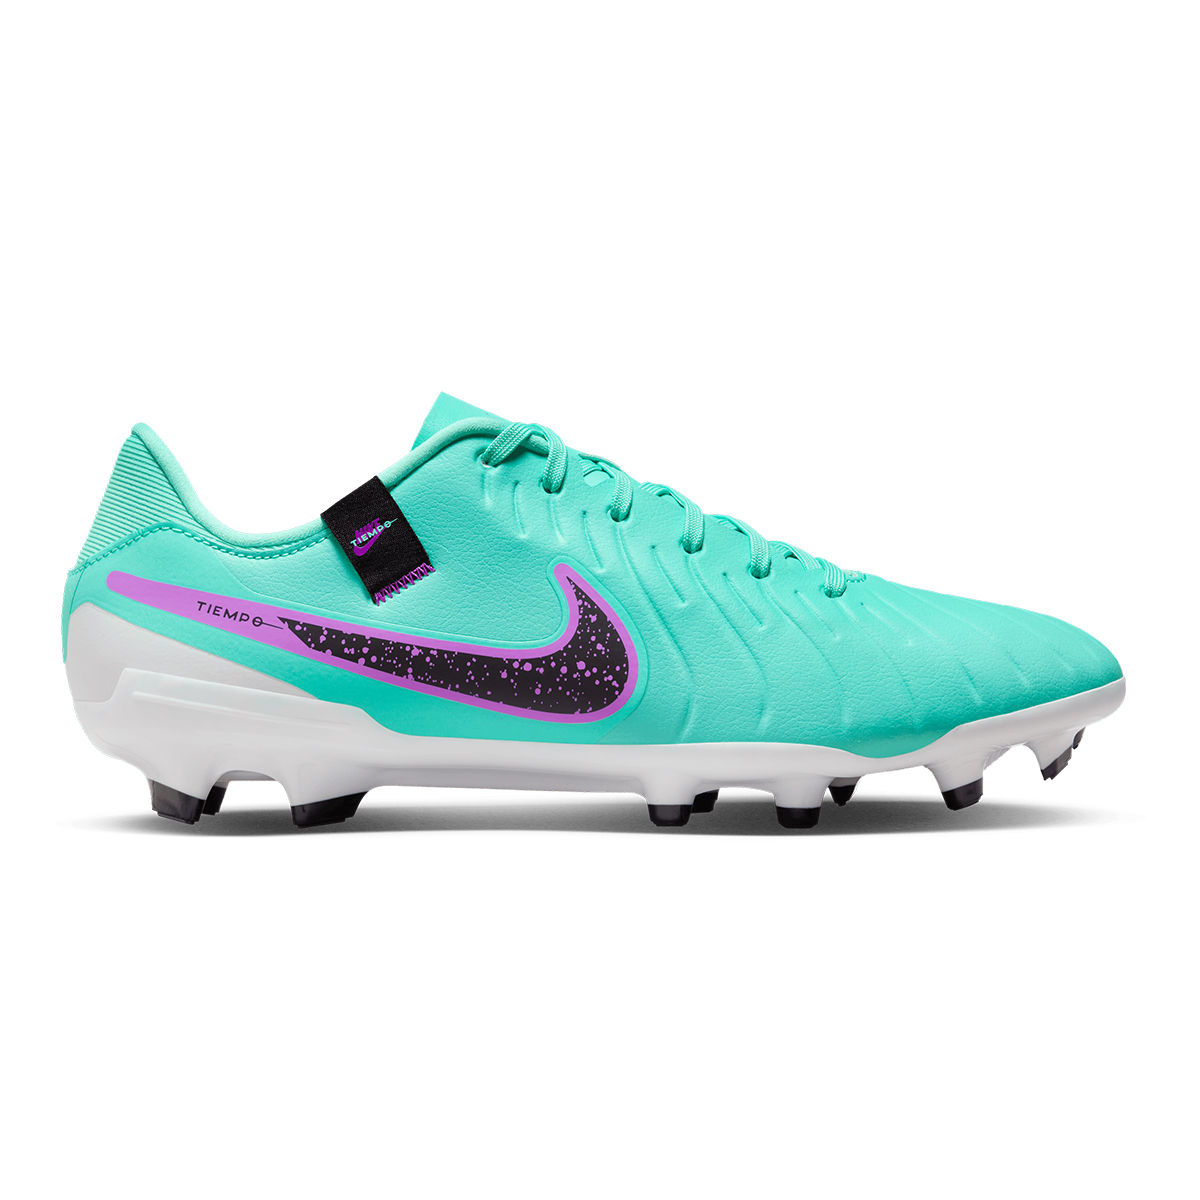 Botines Fútbol Nike Tiempo Legend 10 Academy Mg Hombre,  image number null